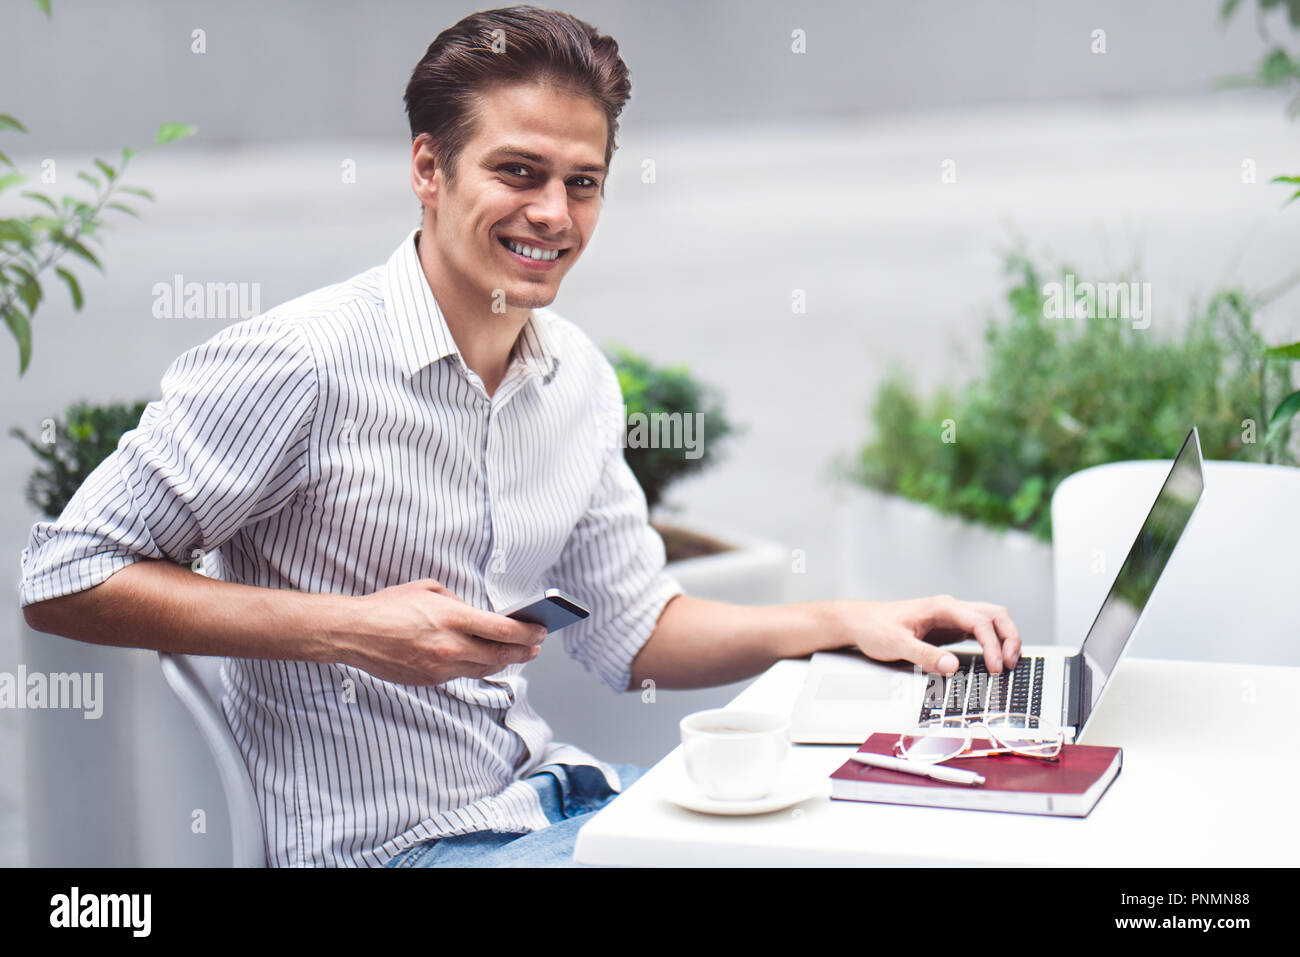 Smart attitude. Positive handsome man using a laptop and sitting in the cafe while surfing the internet. Stock Photo